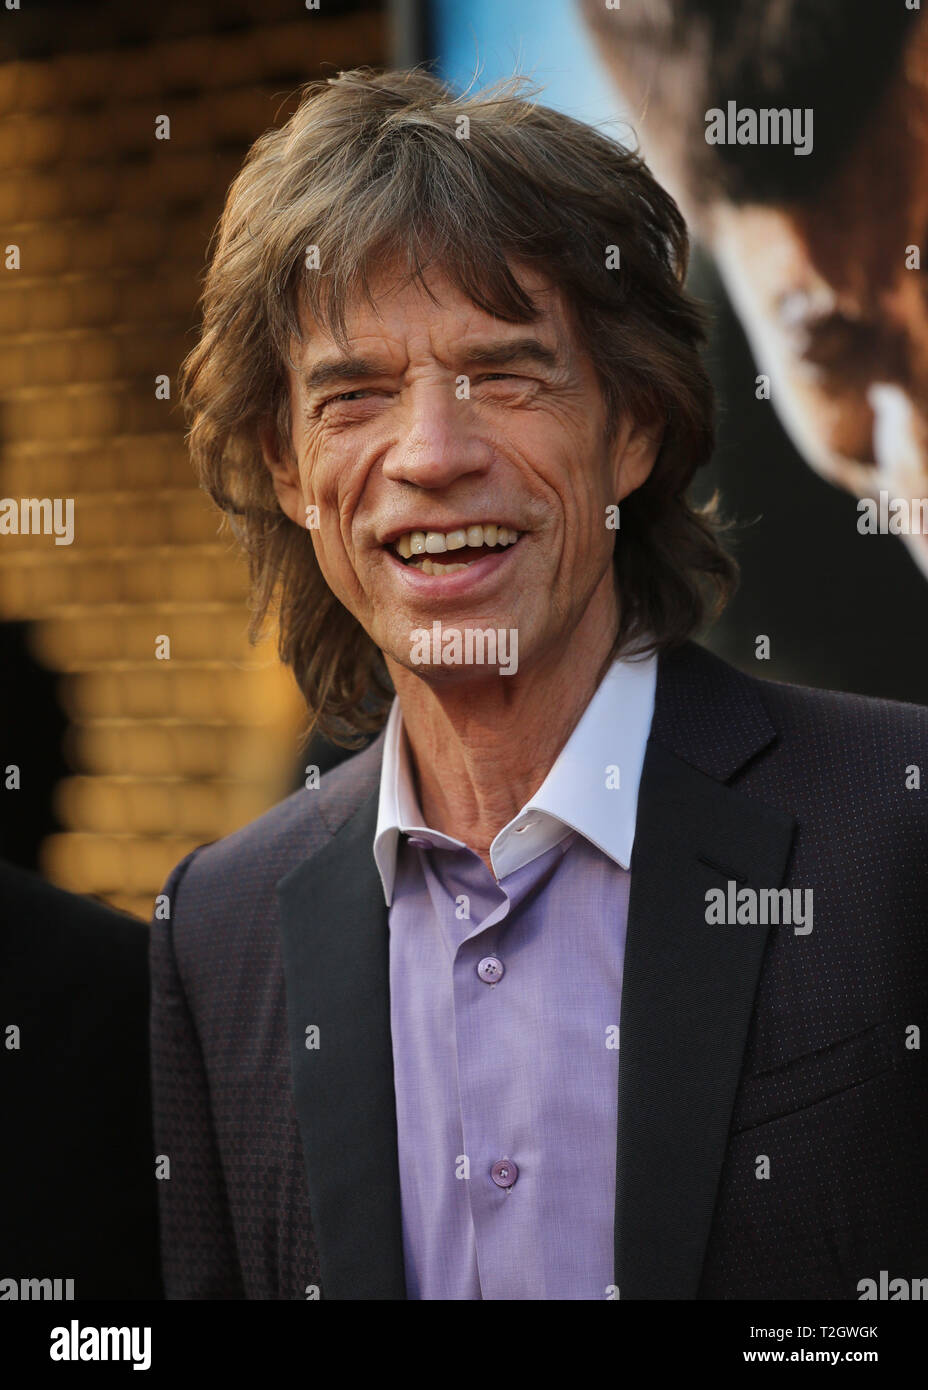 Musician Mick Jagger attends the 'Get On Up' premiere at The Apollo Theater on July 21, 2014 in New York City. Stock Photo